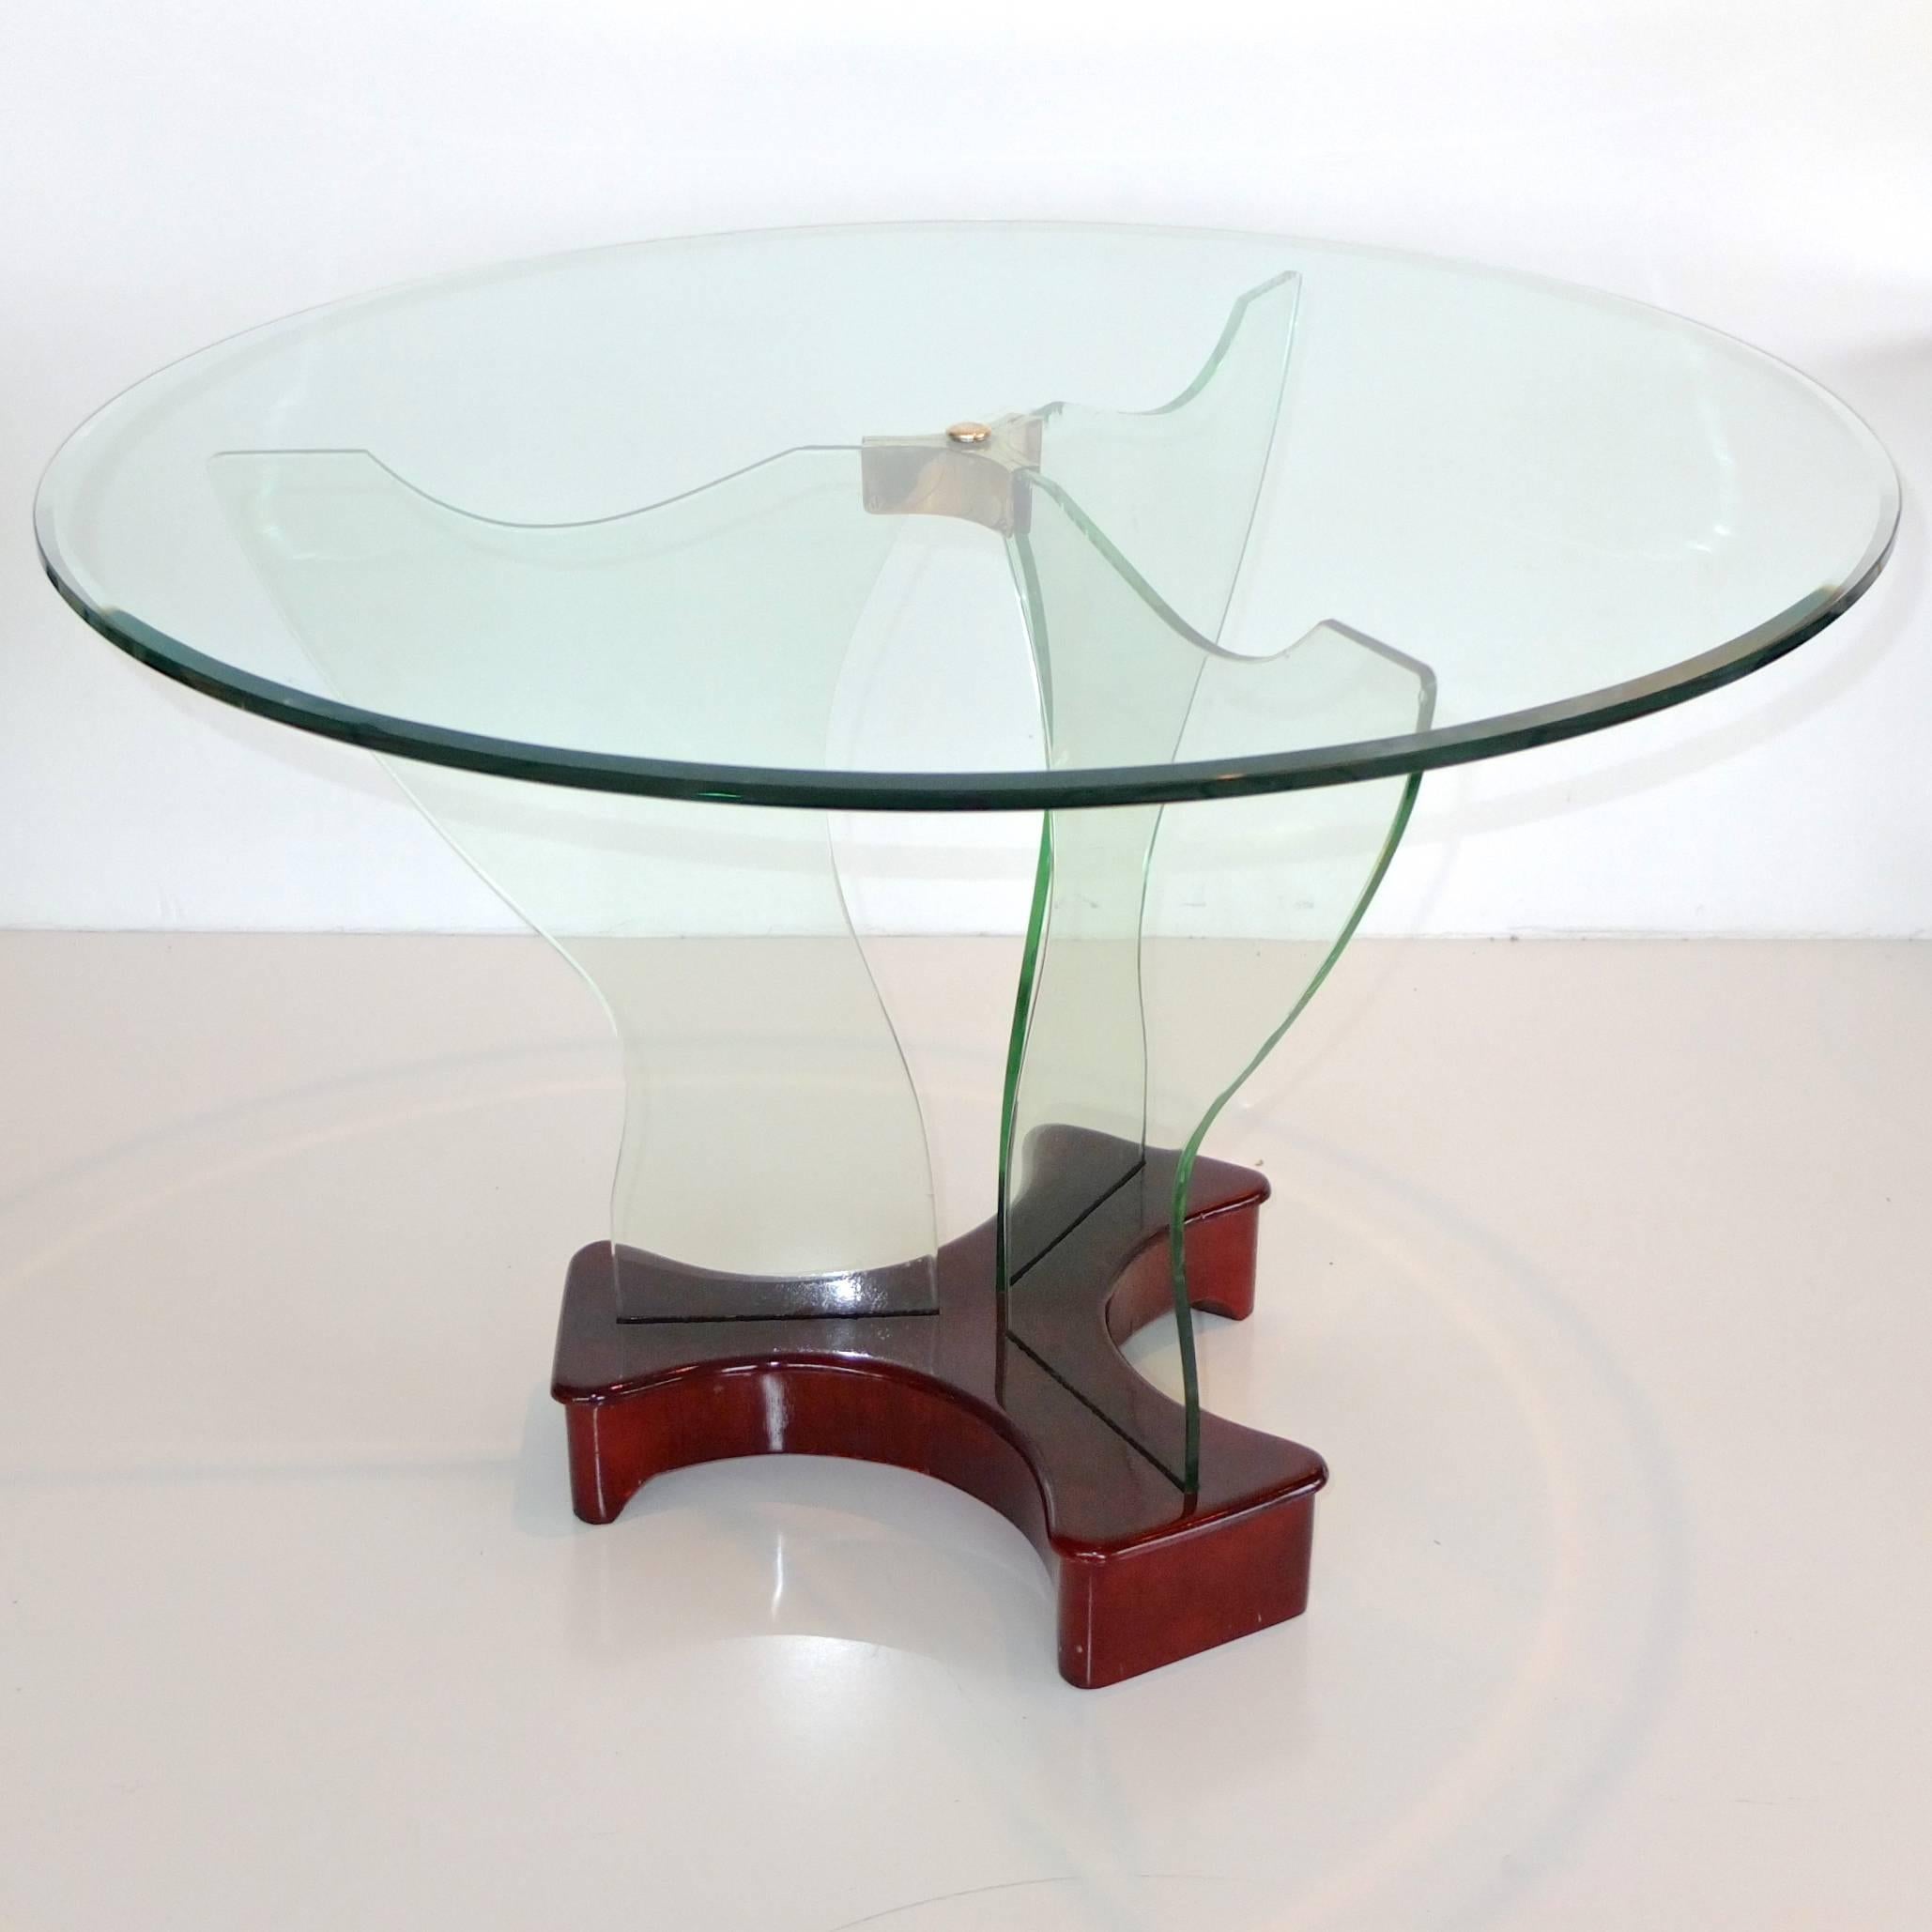 Italian Art Deco 1930s cocktail table by Luigi Brusotti, Milano with round bevelled glass top fastened by brass mount to three panels of shaped securit glass supports mounted on lacquered mahogany clover form base. 

Measures: 21